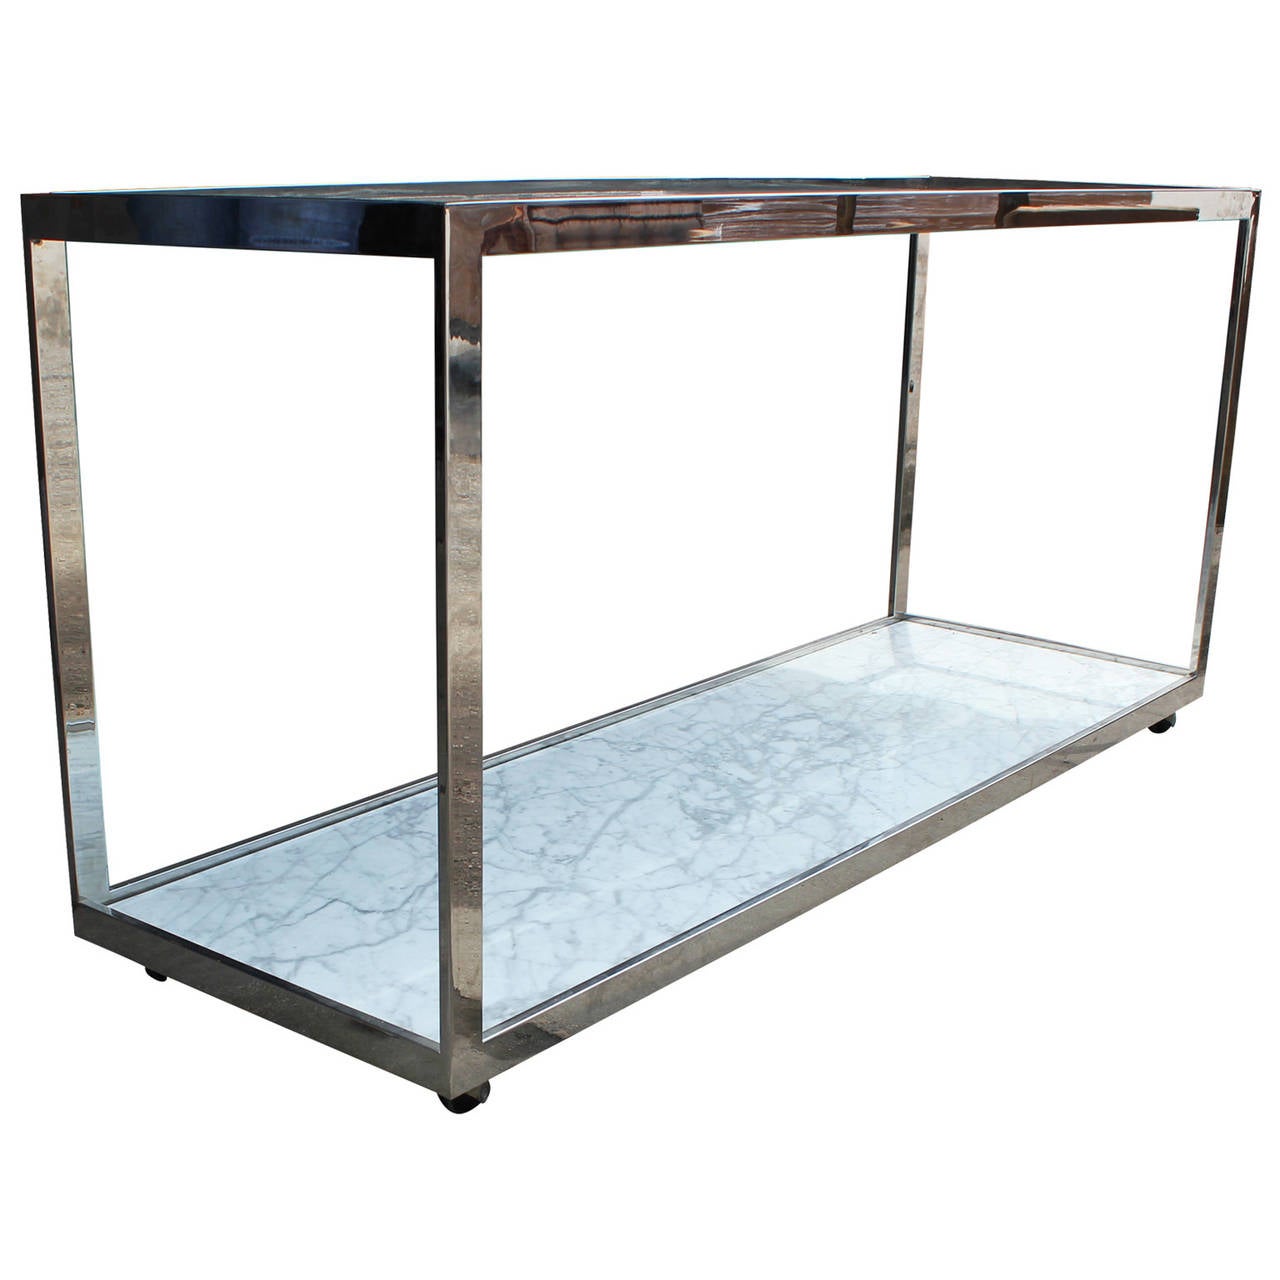 Beautiful clean lined console in chrome. Table top is glass while bottom shelf is a Carrara marble. A truly elegant and timeless piece. Would be a great bar set up or a console table. Great piece!